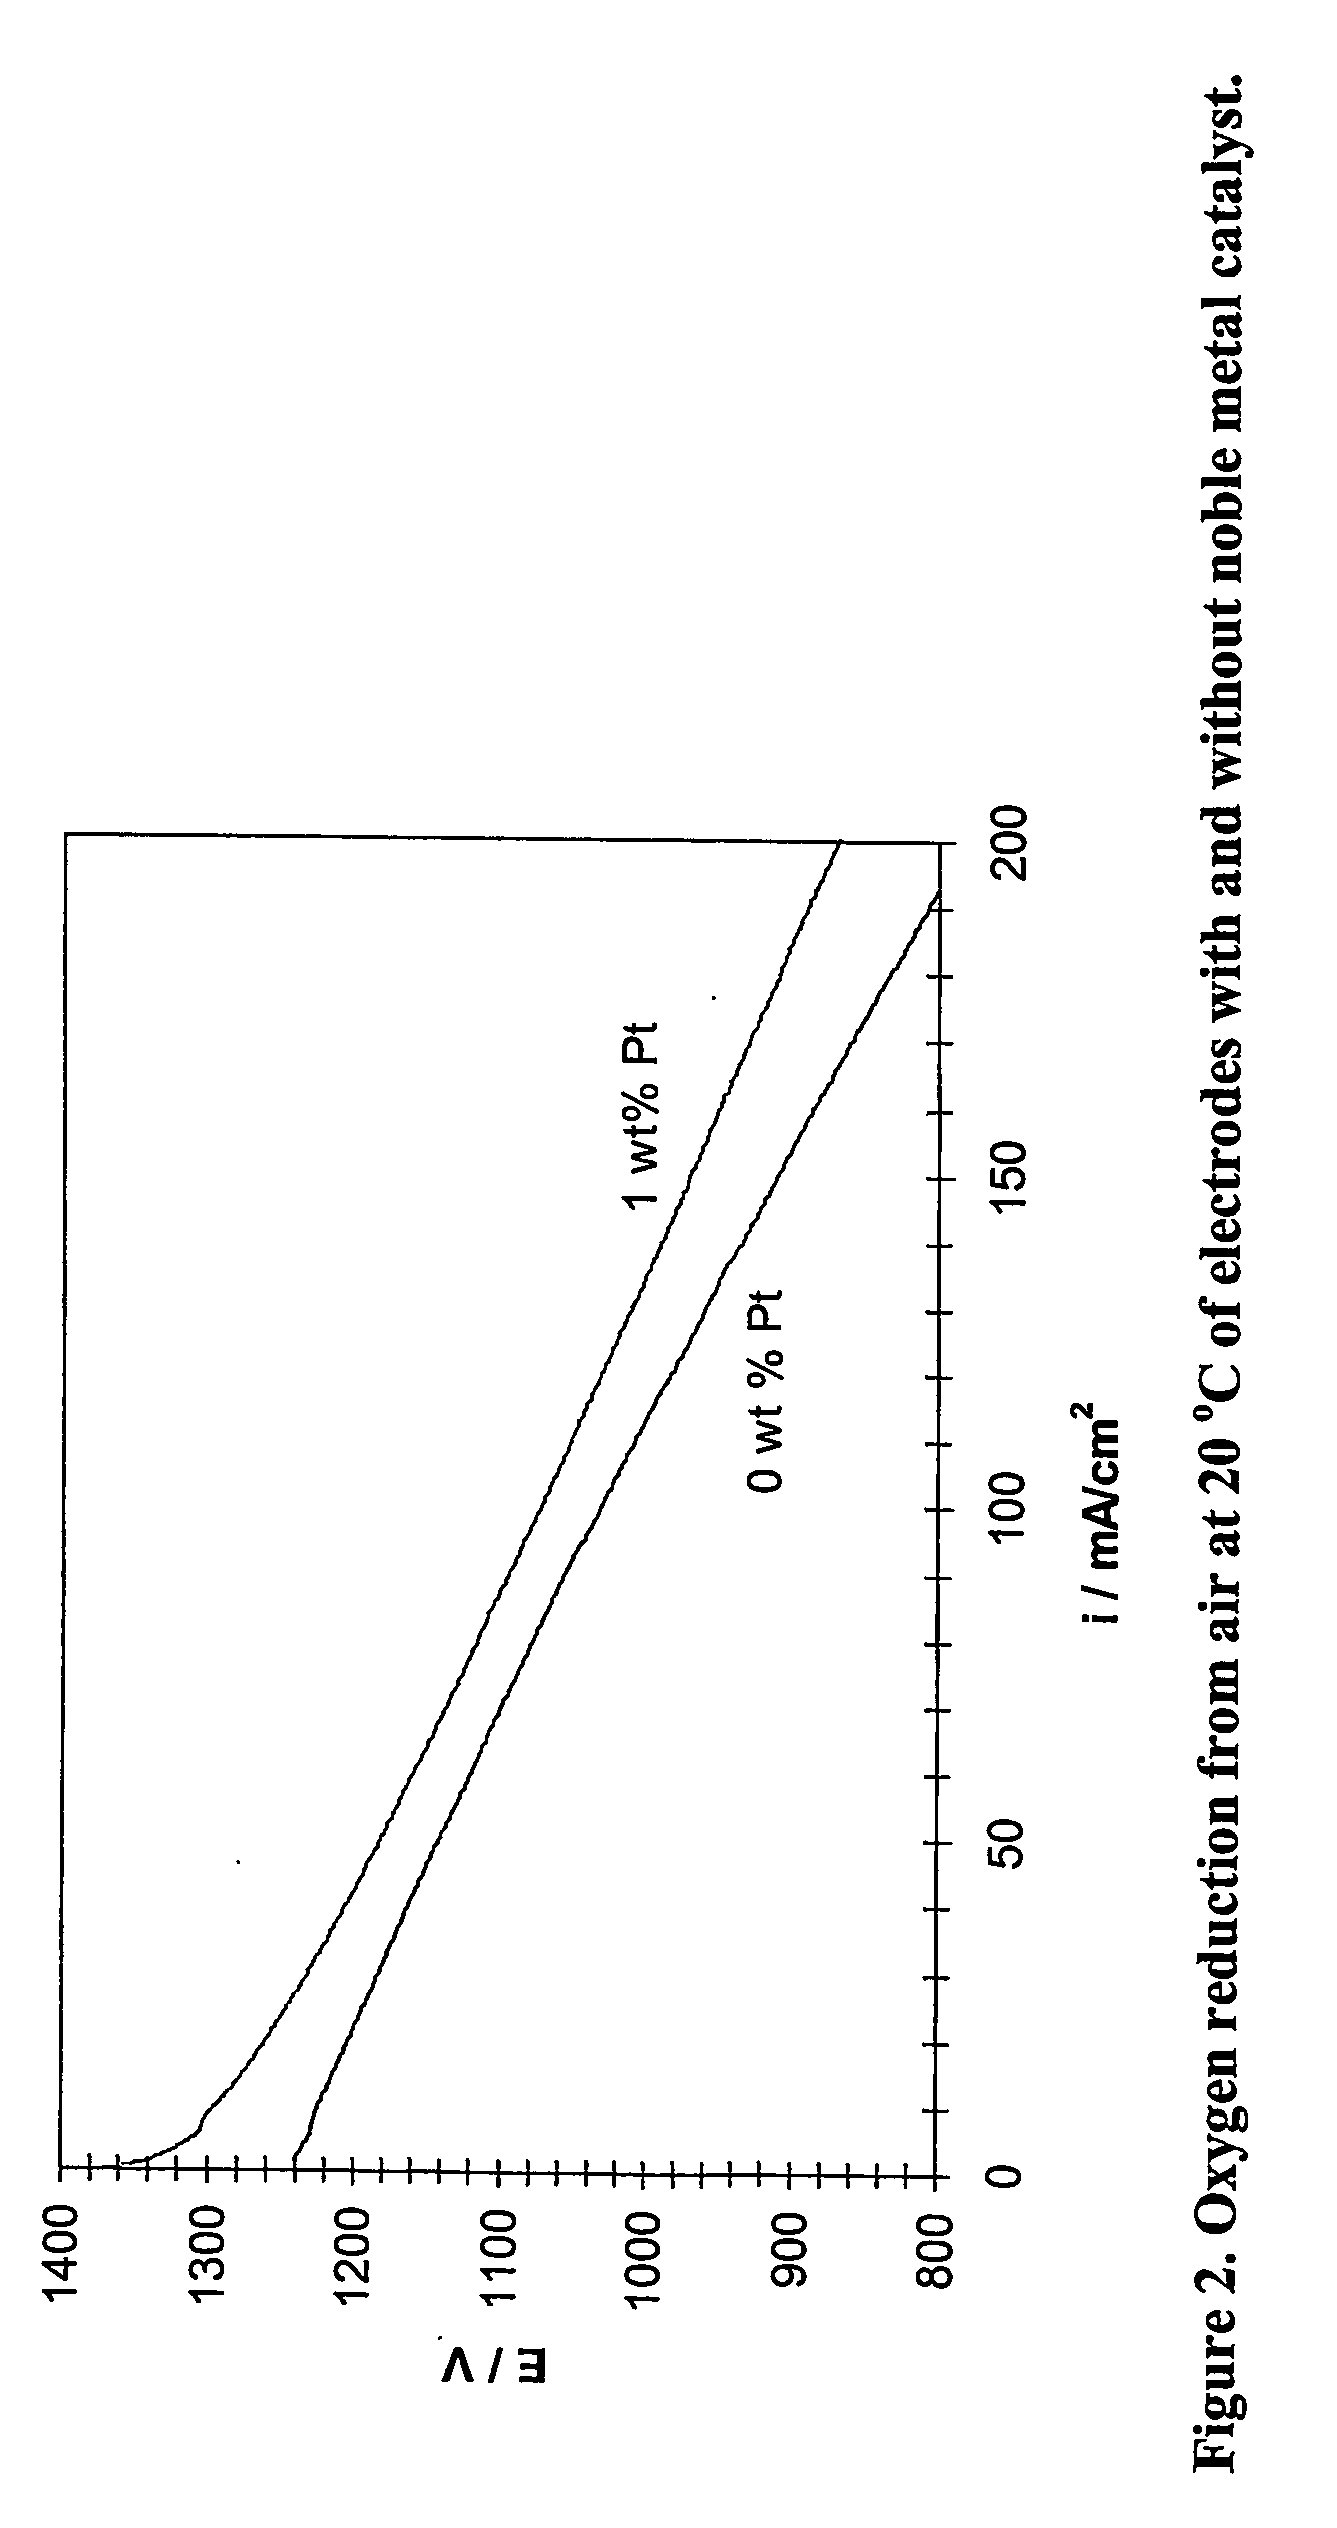 Production of gas diffusion electrodes